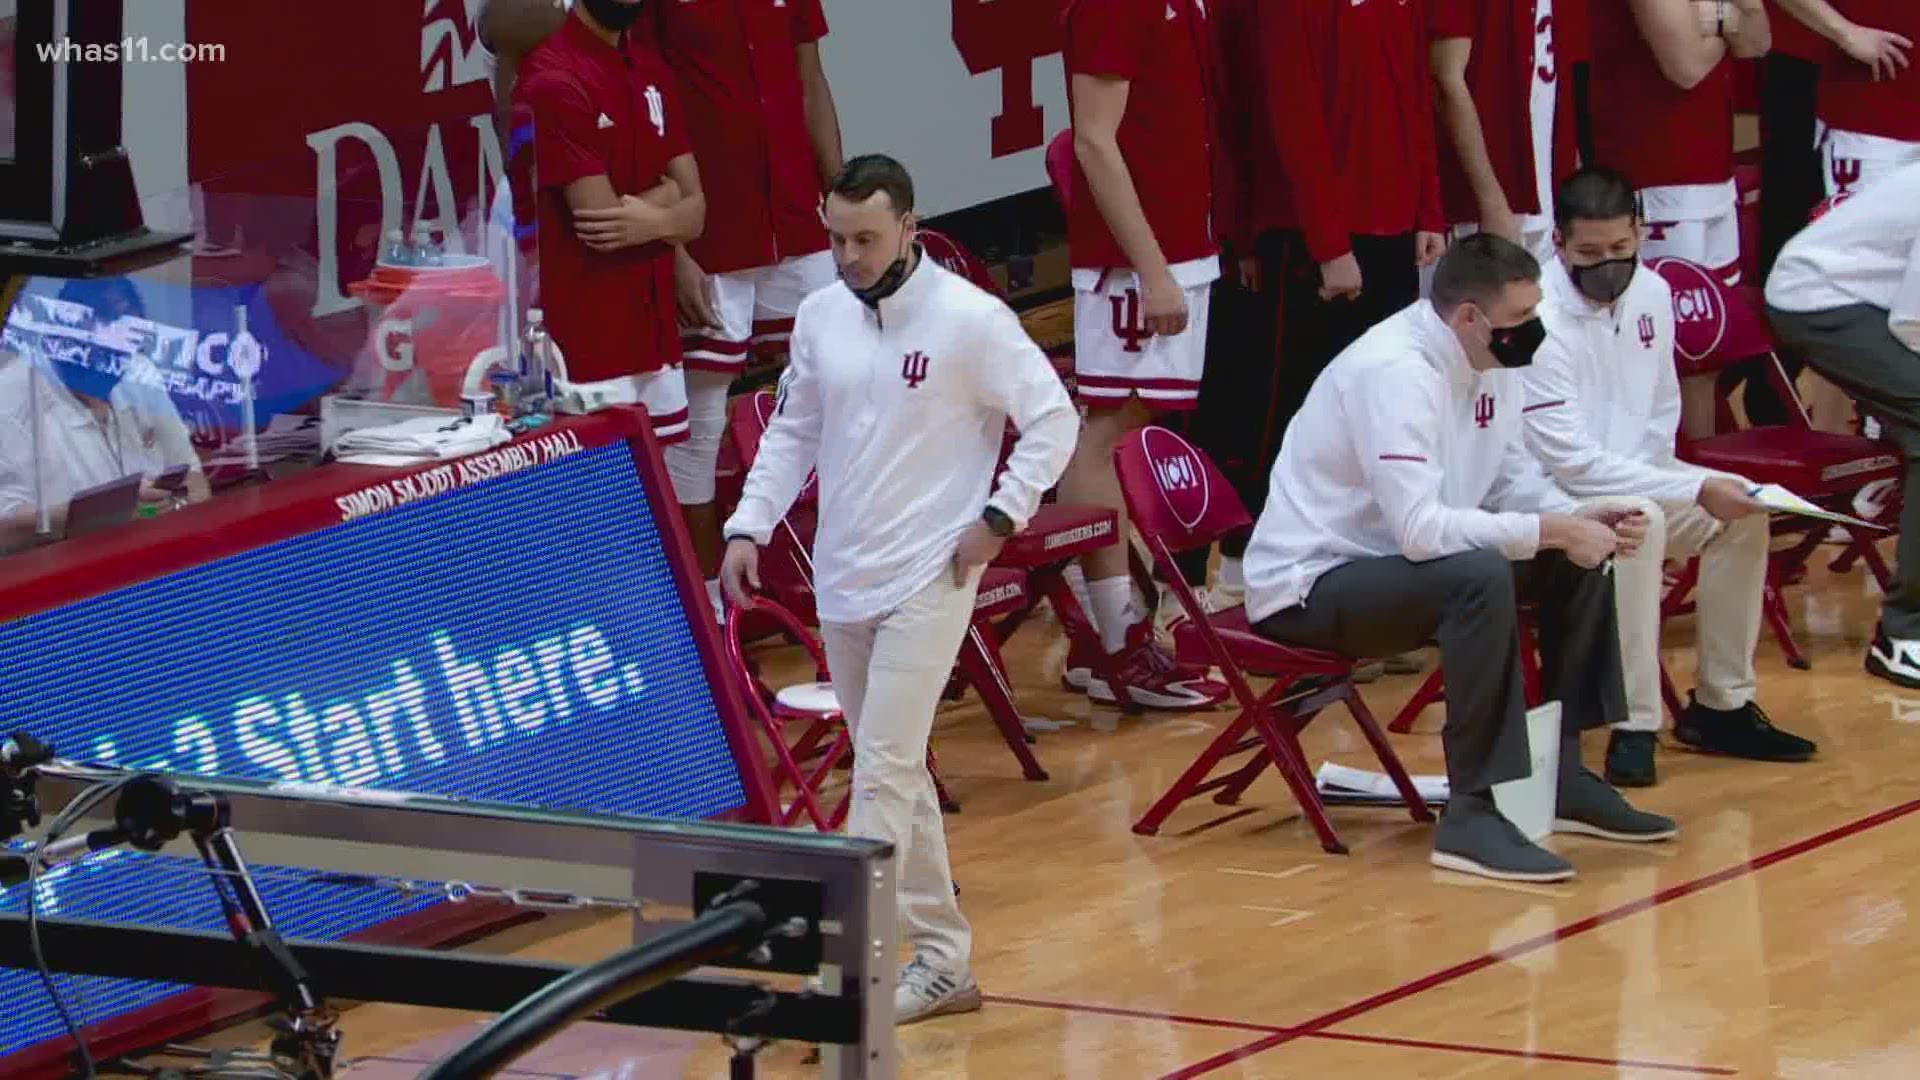 The news comes after IU lost to Rutgers Thursday in the Big Ten Men's Basketball Tournament.